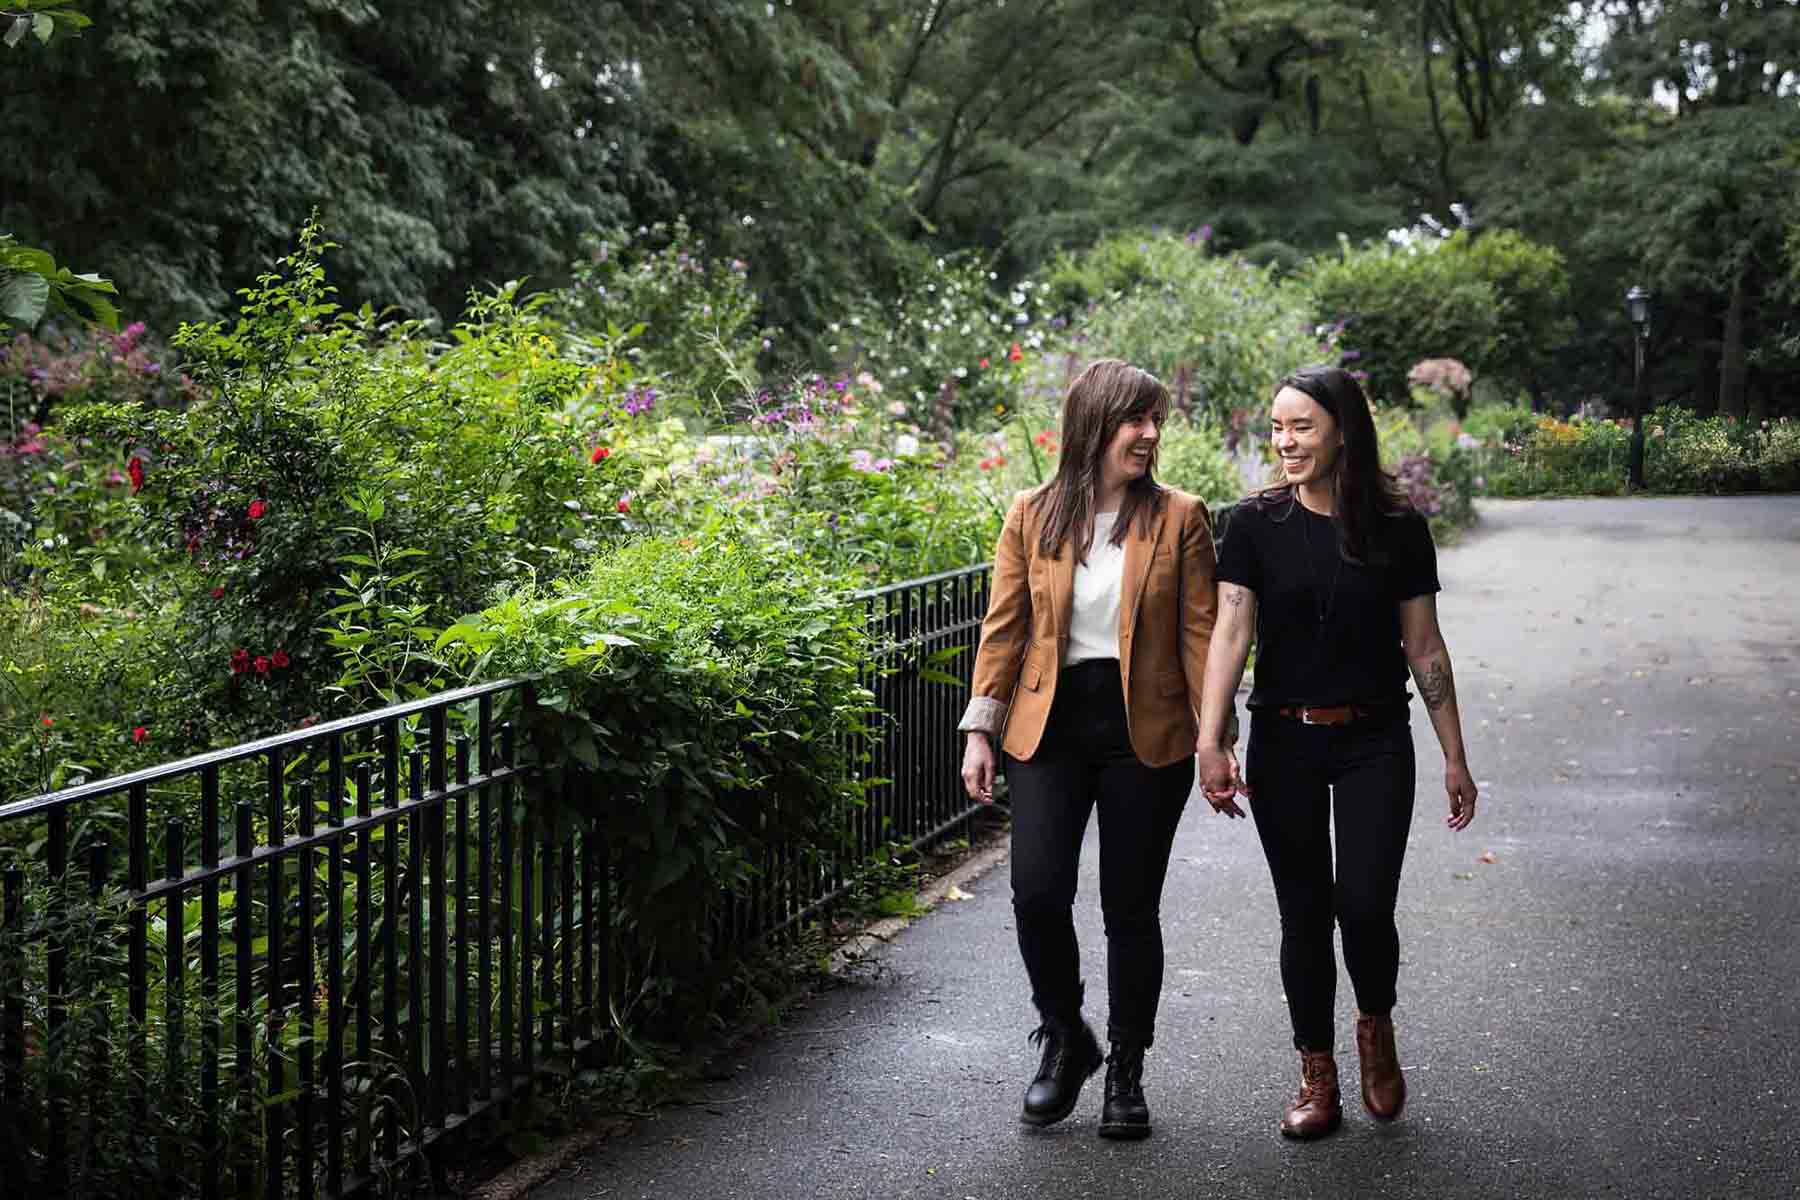 Two women walking hand-in-hand in Riverside Park by a gated garden for an article on how to produce a movie-themed surprise proposal